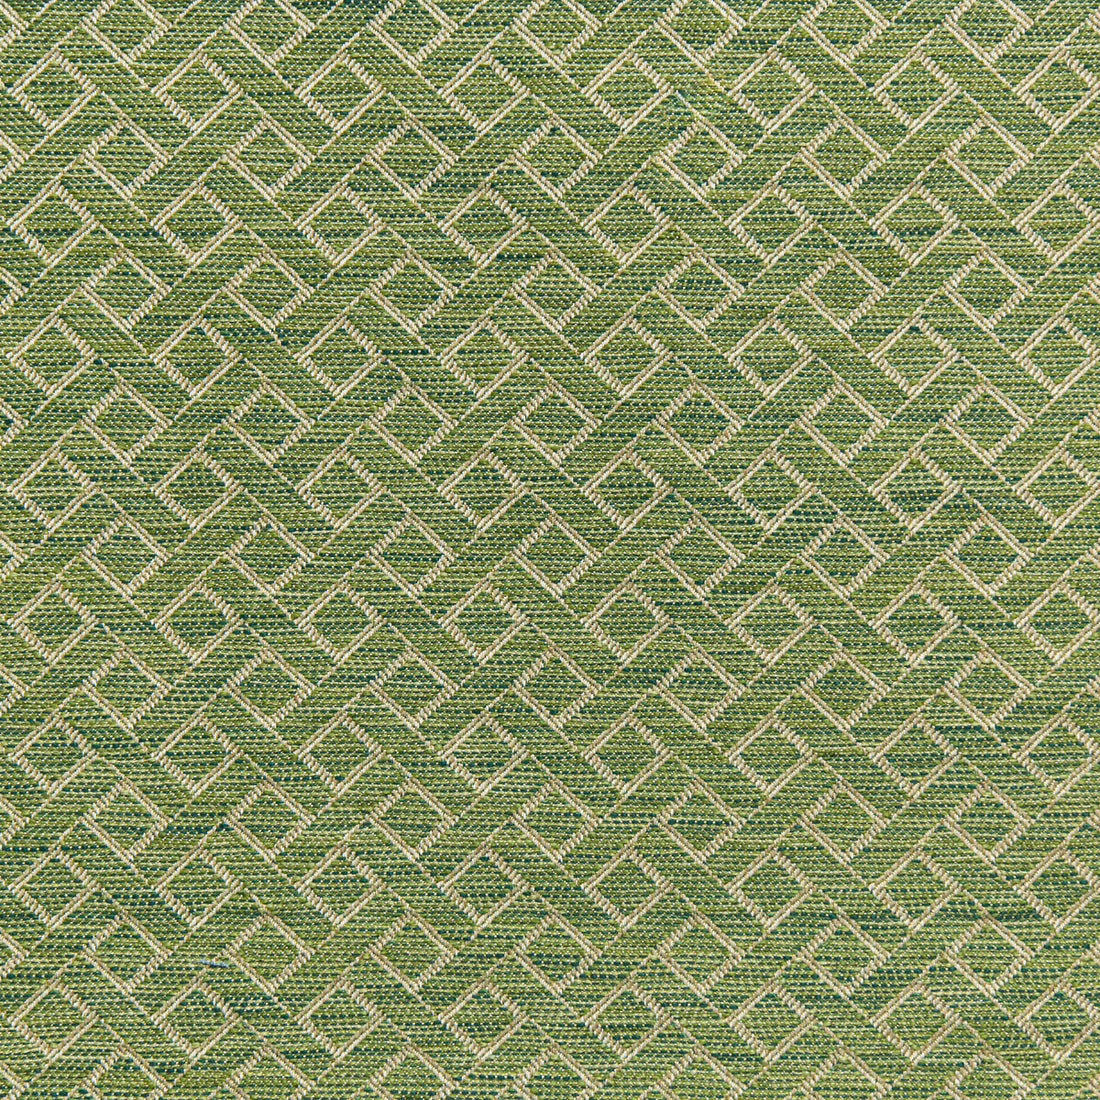 Maldon Weave fabric in aloe color - pattern 2020102.3.0 - by Lee Jofa in the Linford Weaves collection